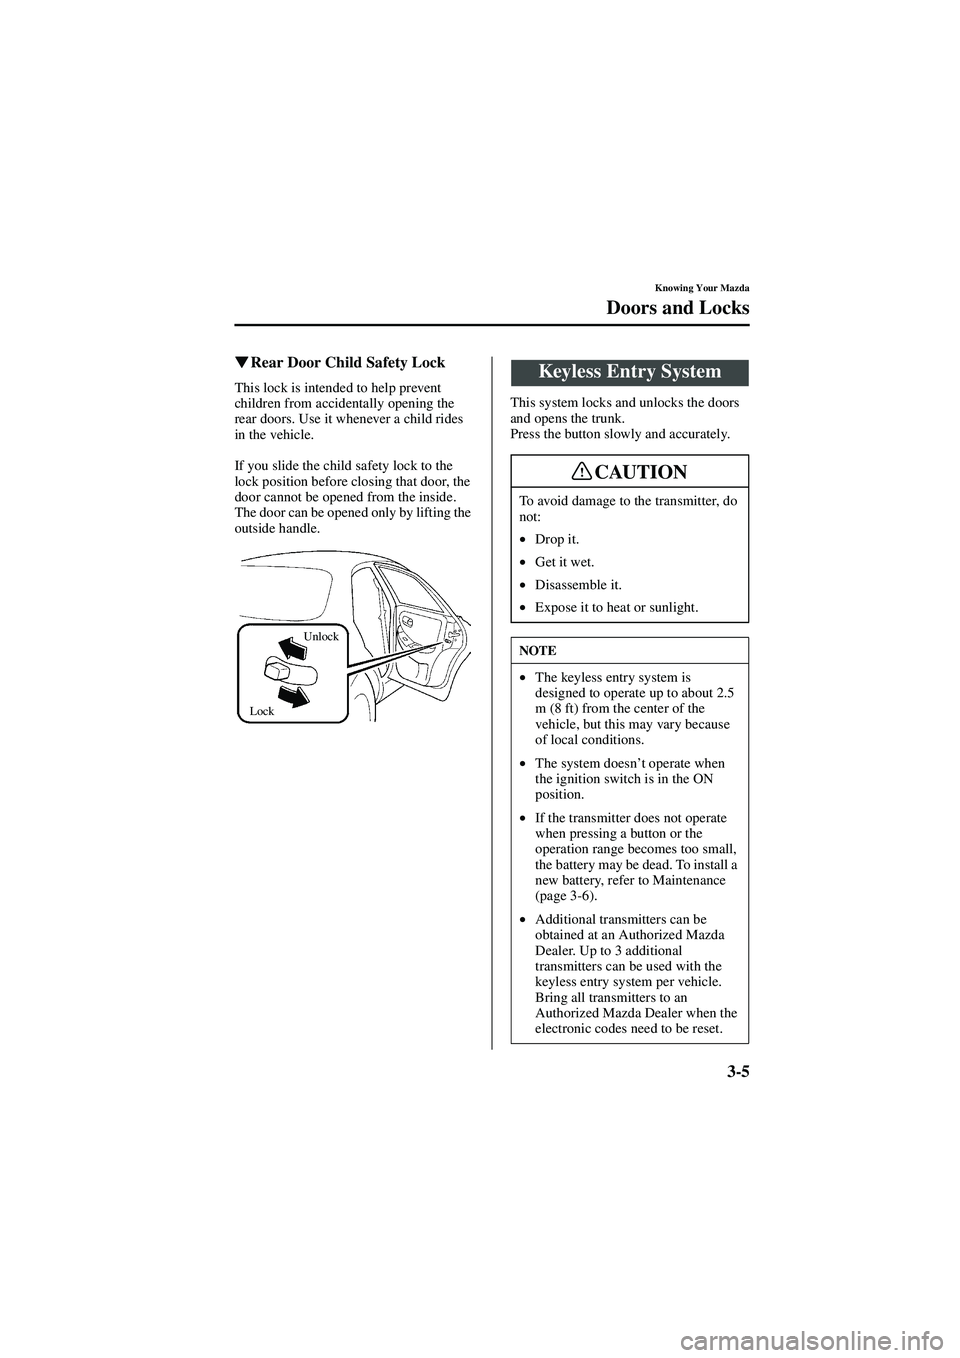 MAZDA MODEL 626 2002 Service Manual 3-5
Knowing Your Mazda
Doors and Locks
Form No. 8Q50-EA-01G

  Rear Door Child Safety Lock
This lock is intended to help prevent 
children from accidentally opening the 
rear doors. Use it wheneve